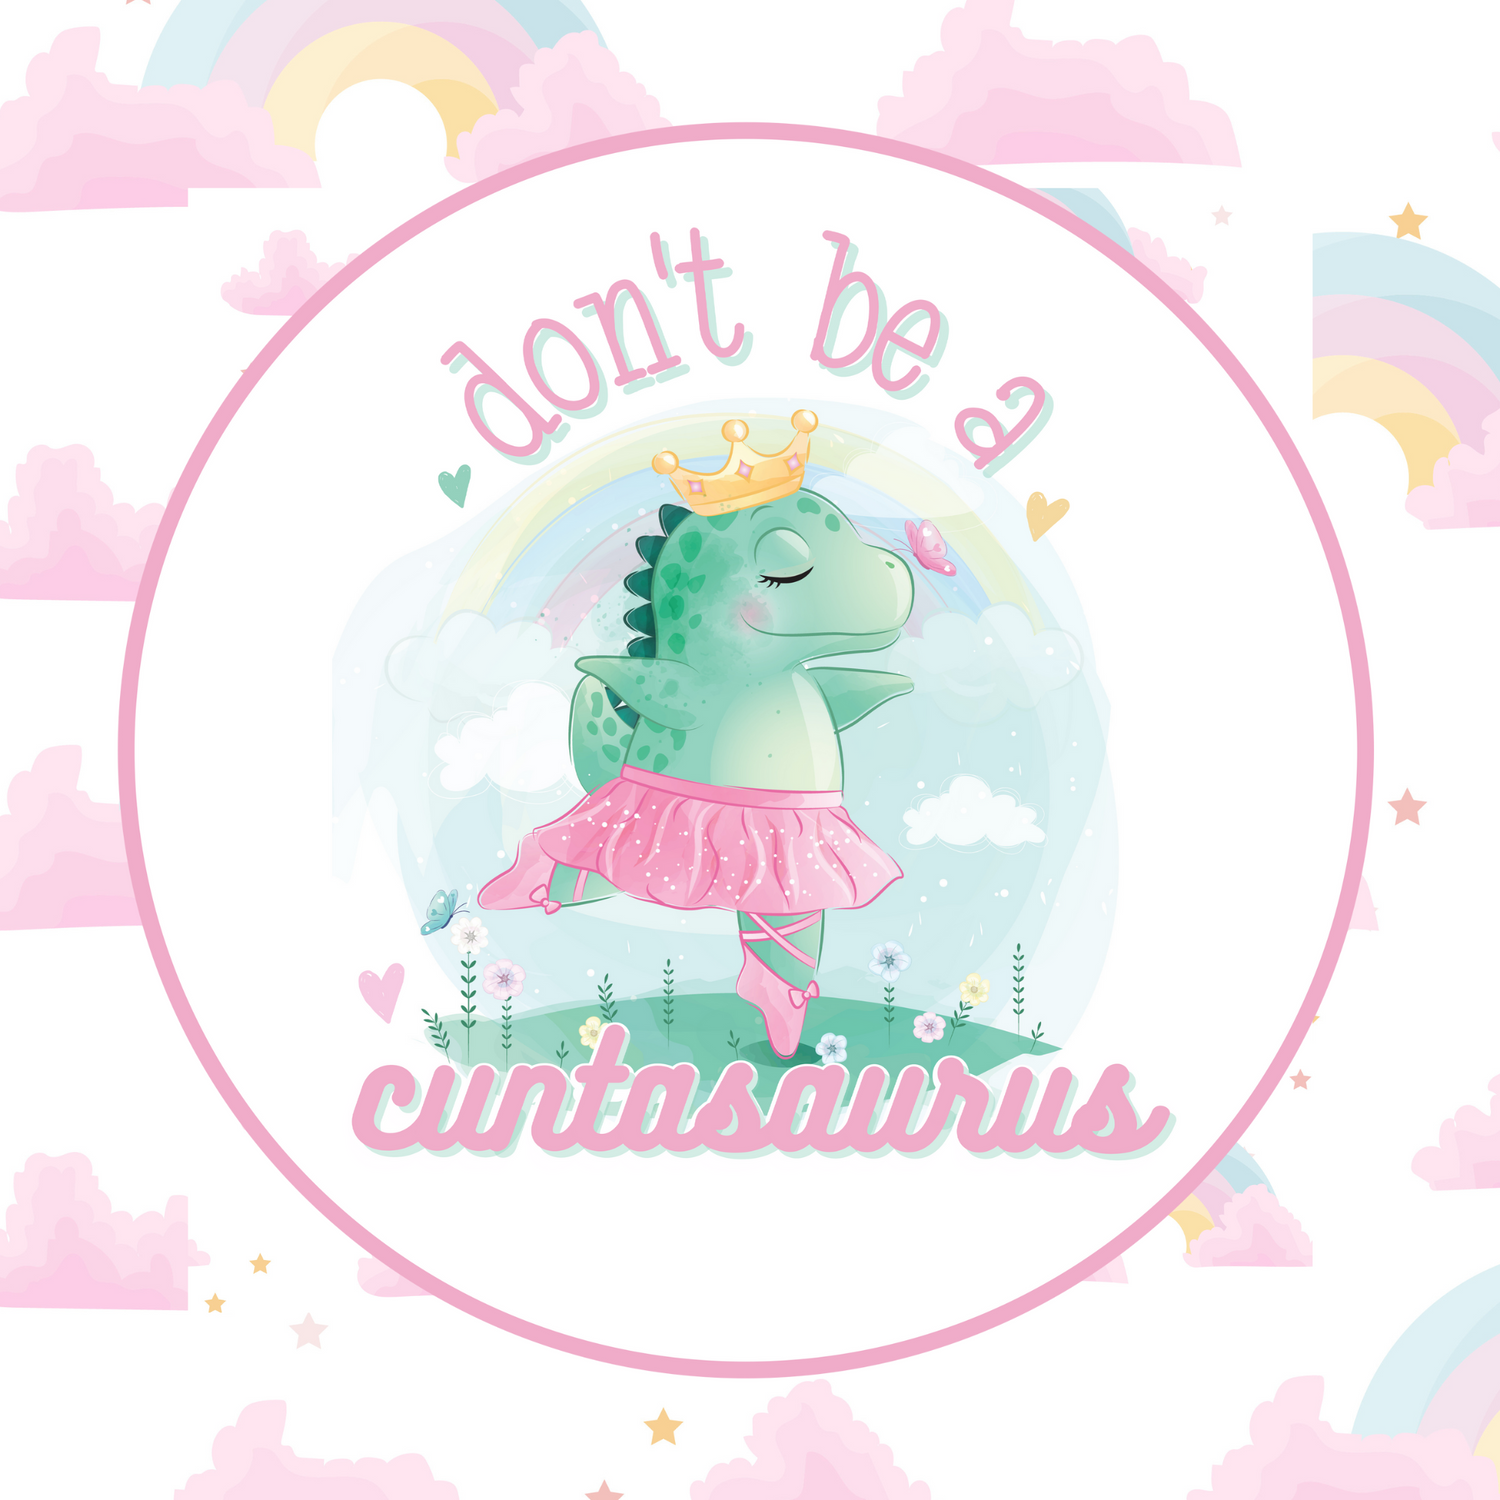 Don't Be A Cuntasaurus